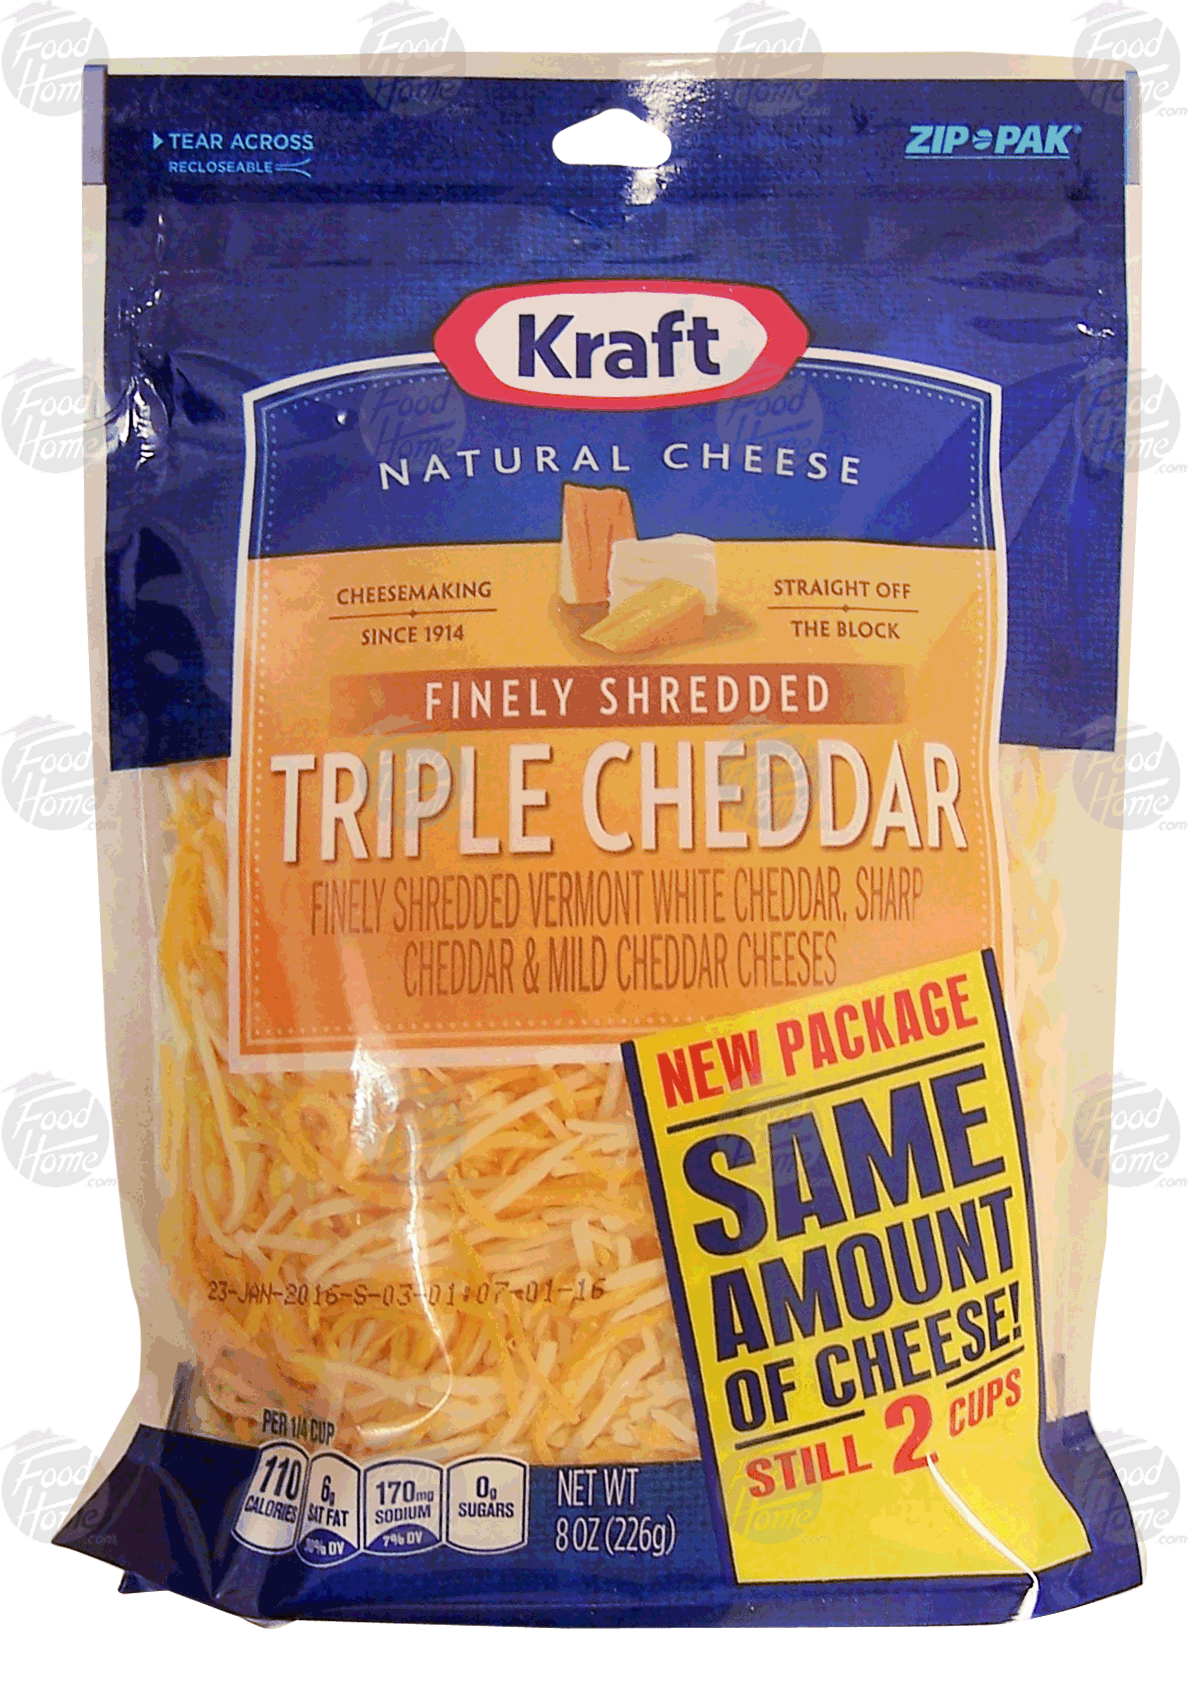 Kraft Natural Cheese triple cheddar, finely shredded vermont white cheddar, sharp cheddar & mild cheddar cheeses Full-Size Picture